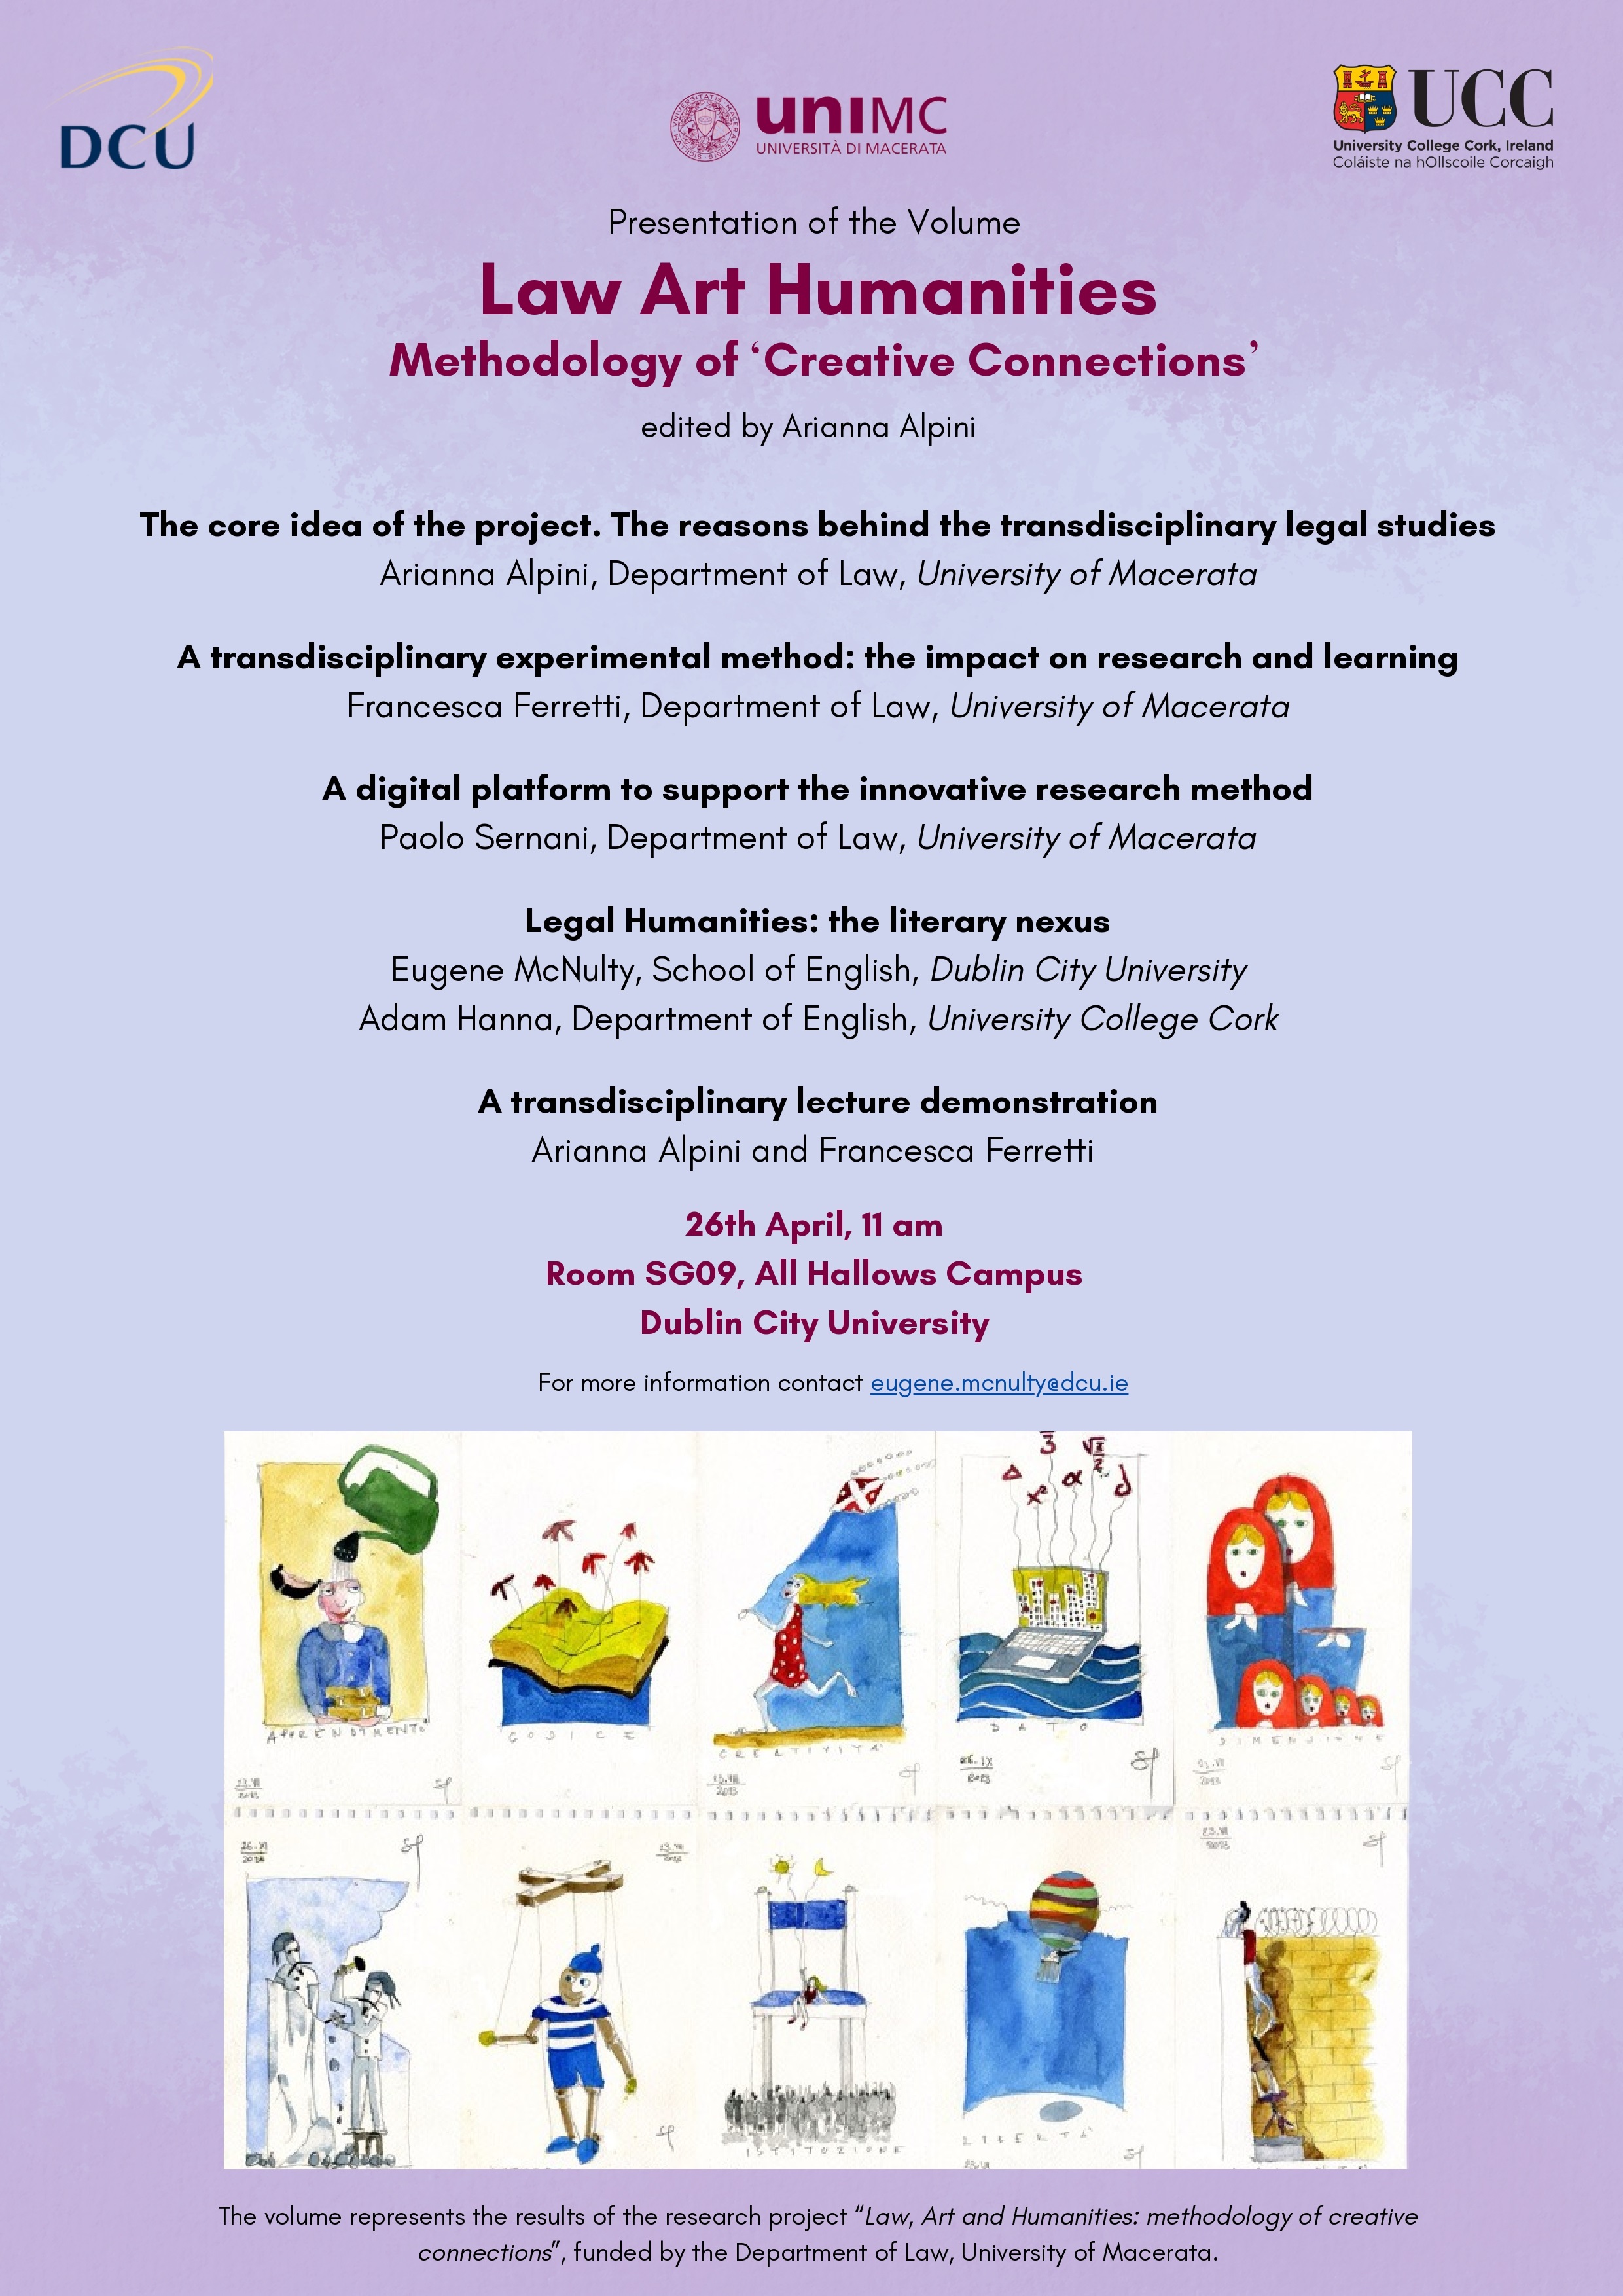 Law Art Humanities Methodology of Creative Connections